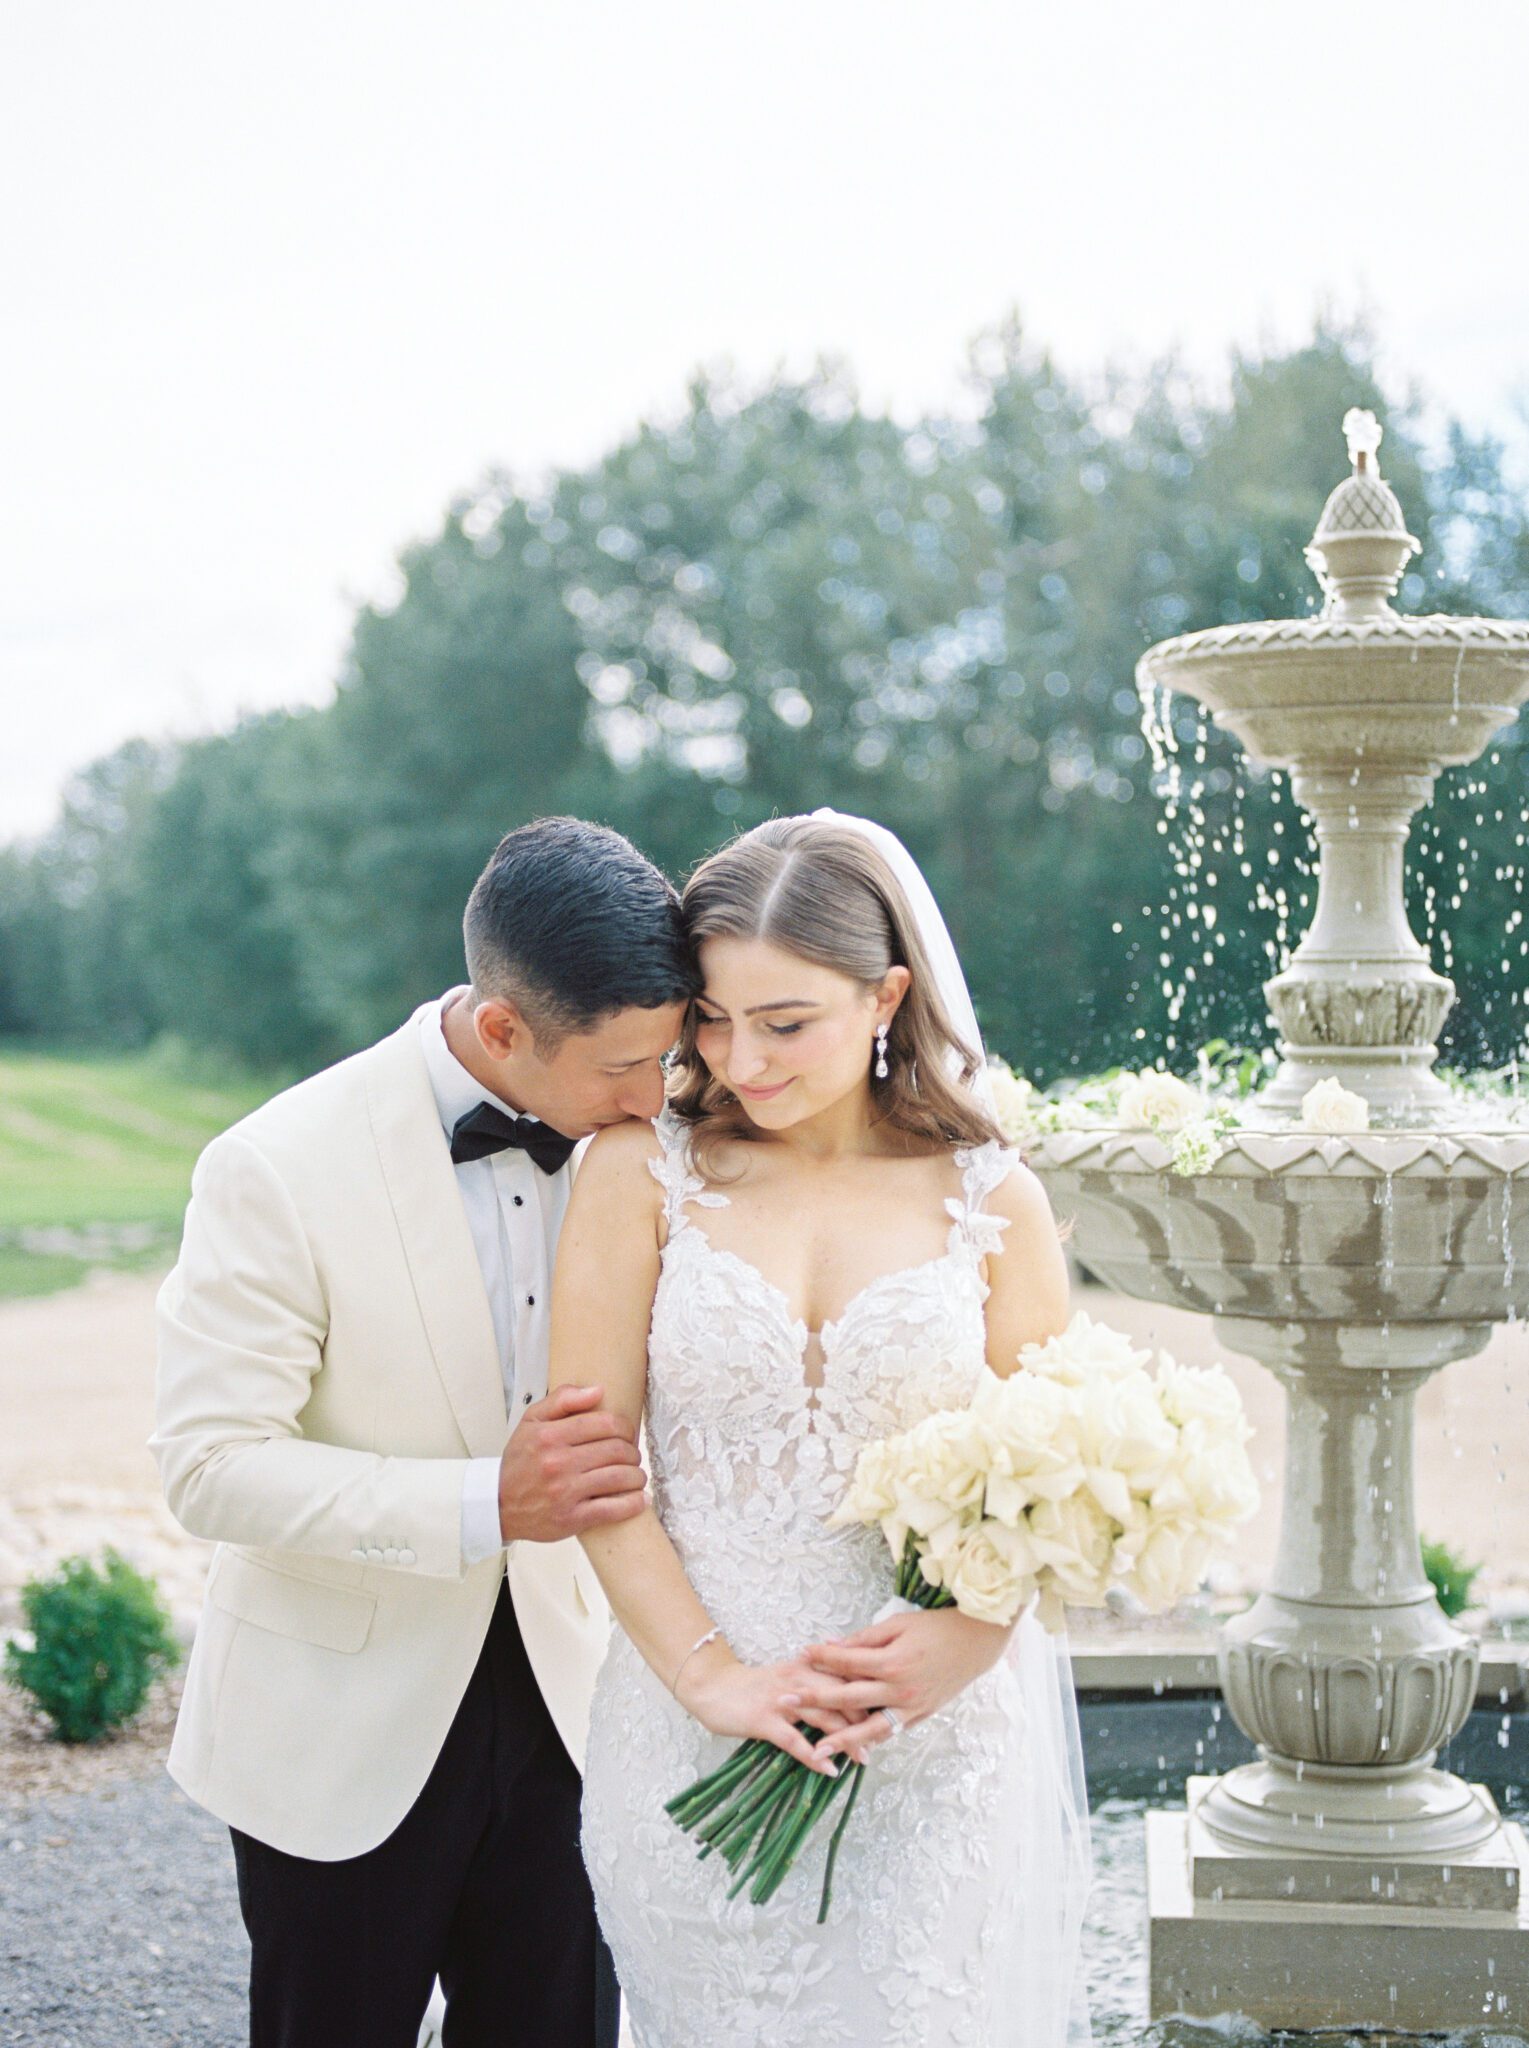 Elegant bride and groom embracing in front of water fountain at Sparrow Lane Events in Alberta. Classic colour palette of white, blush, and green wedding inspiration.